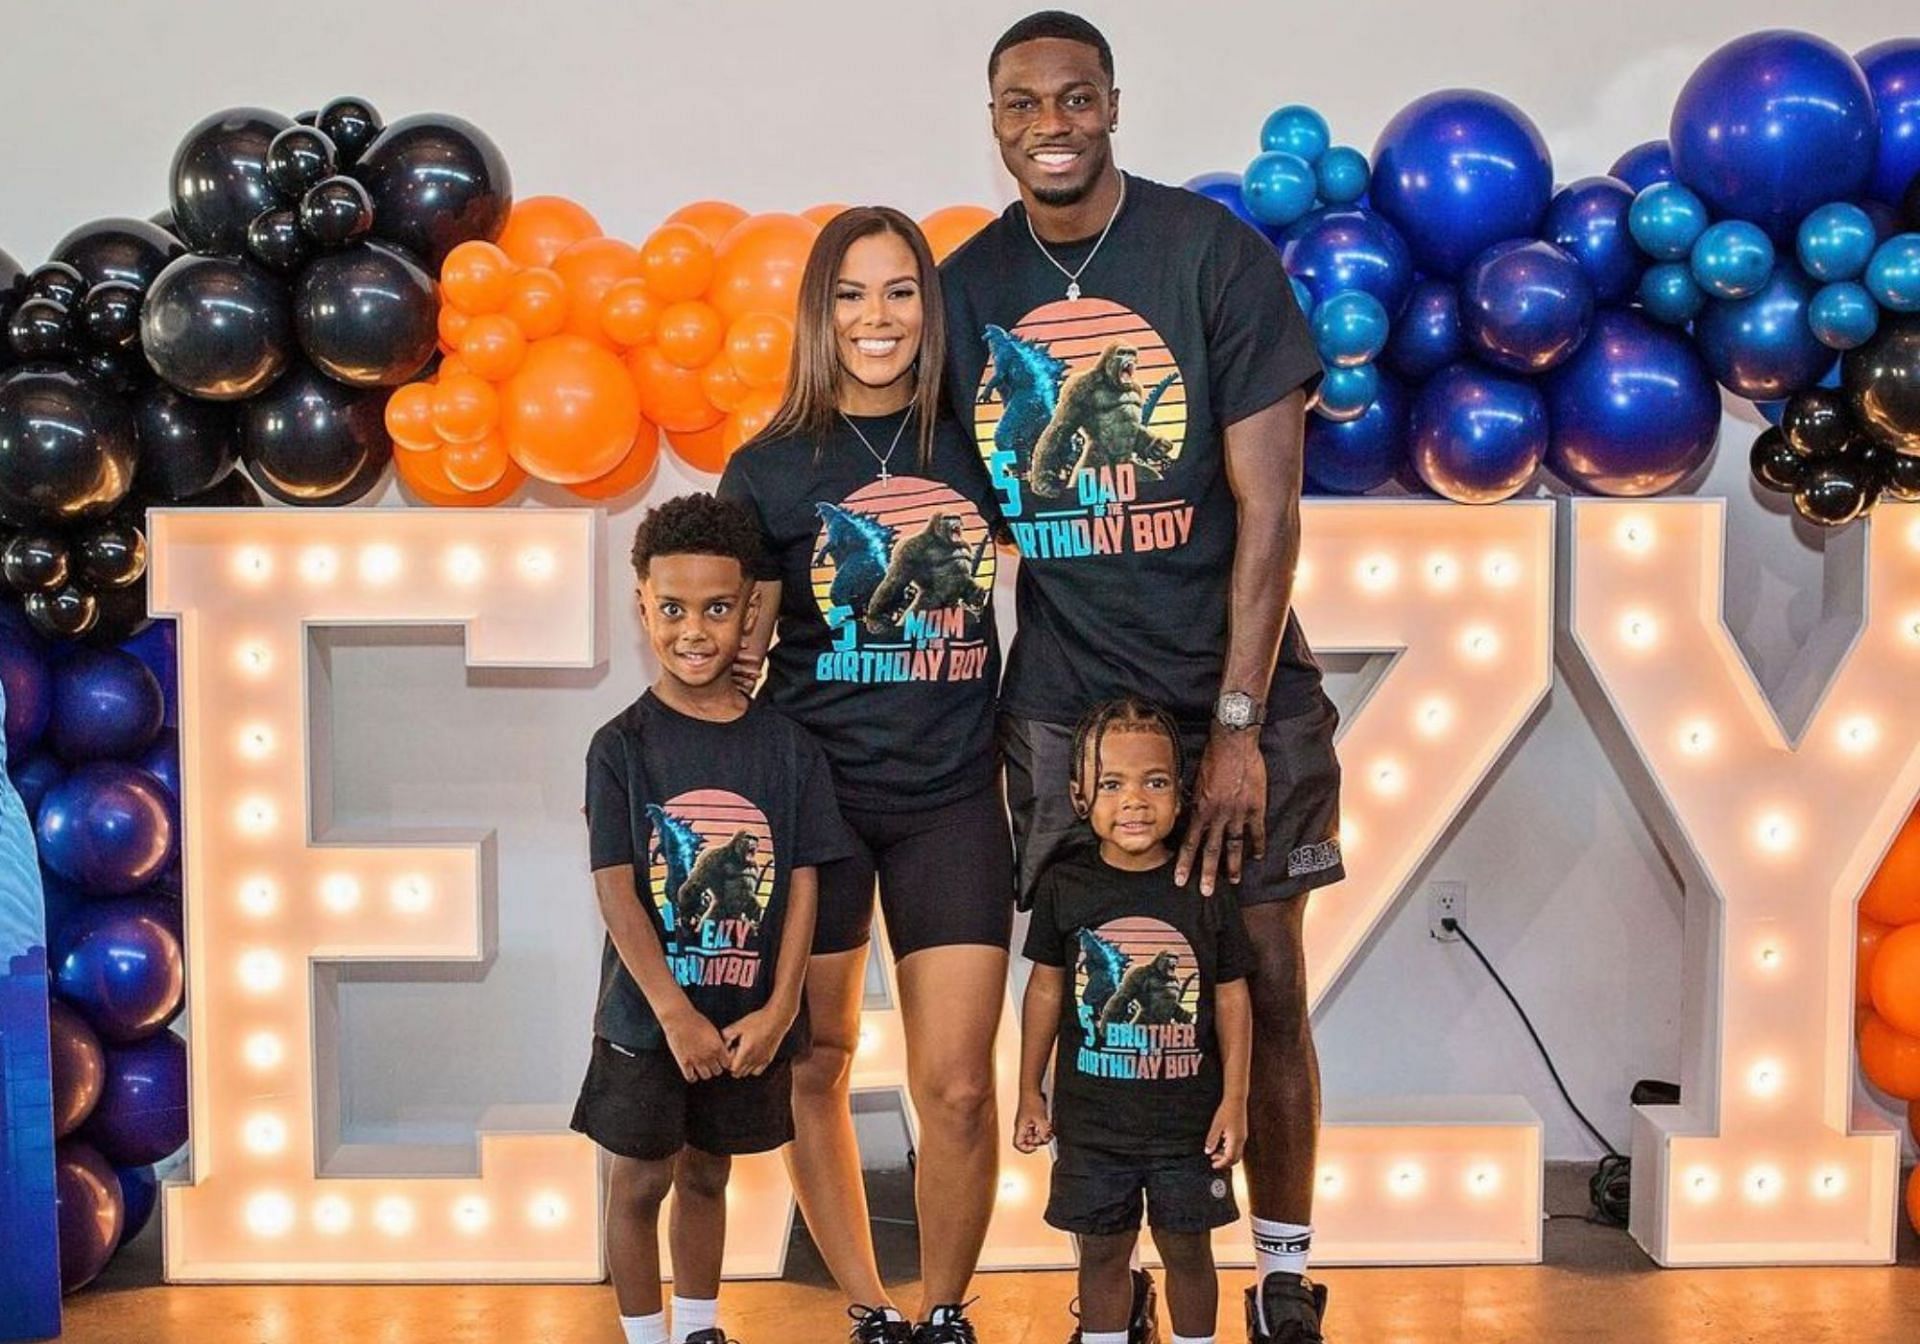 A,J. Green with his wife and kids